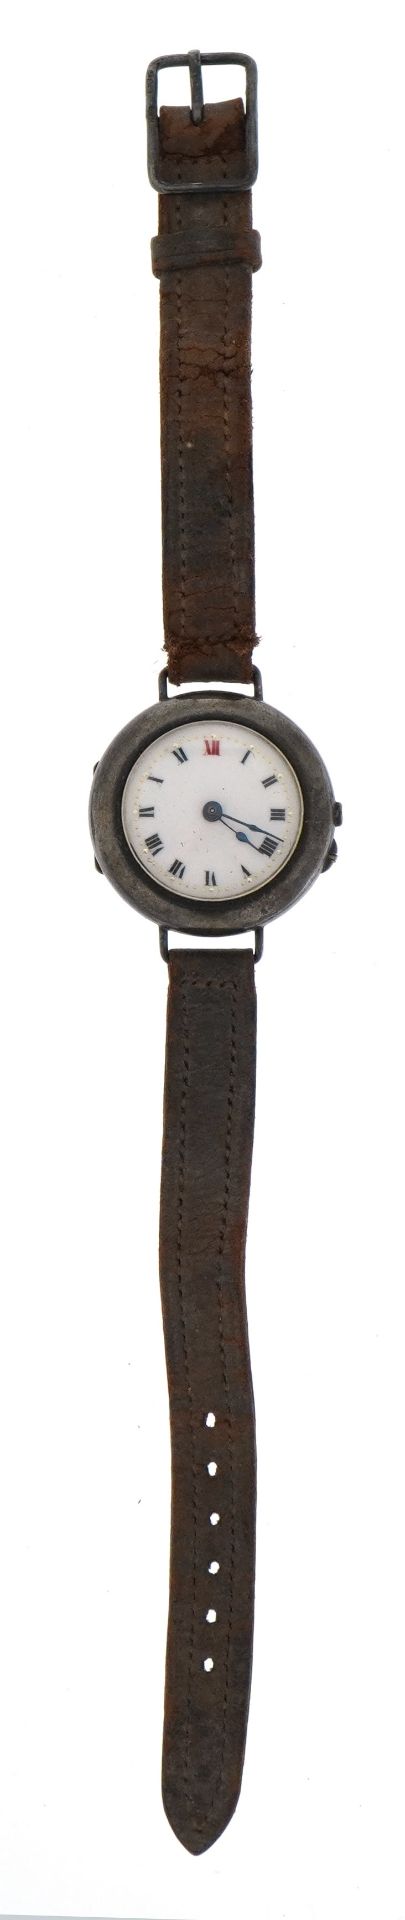 British military interest silver wristwatch with enamelled dial, the case engraved W F Caygill - Image 2 of 6